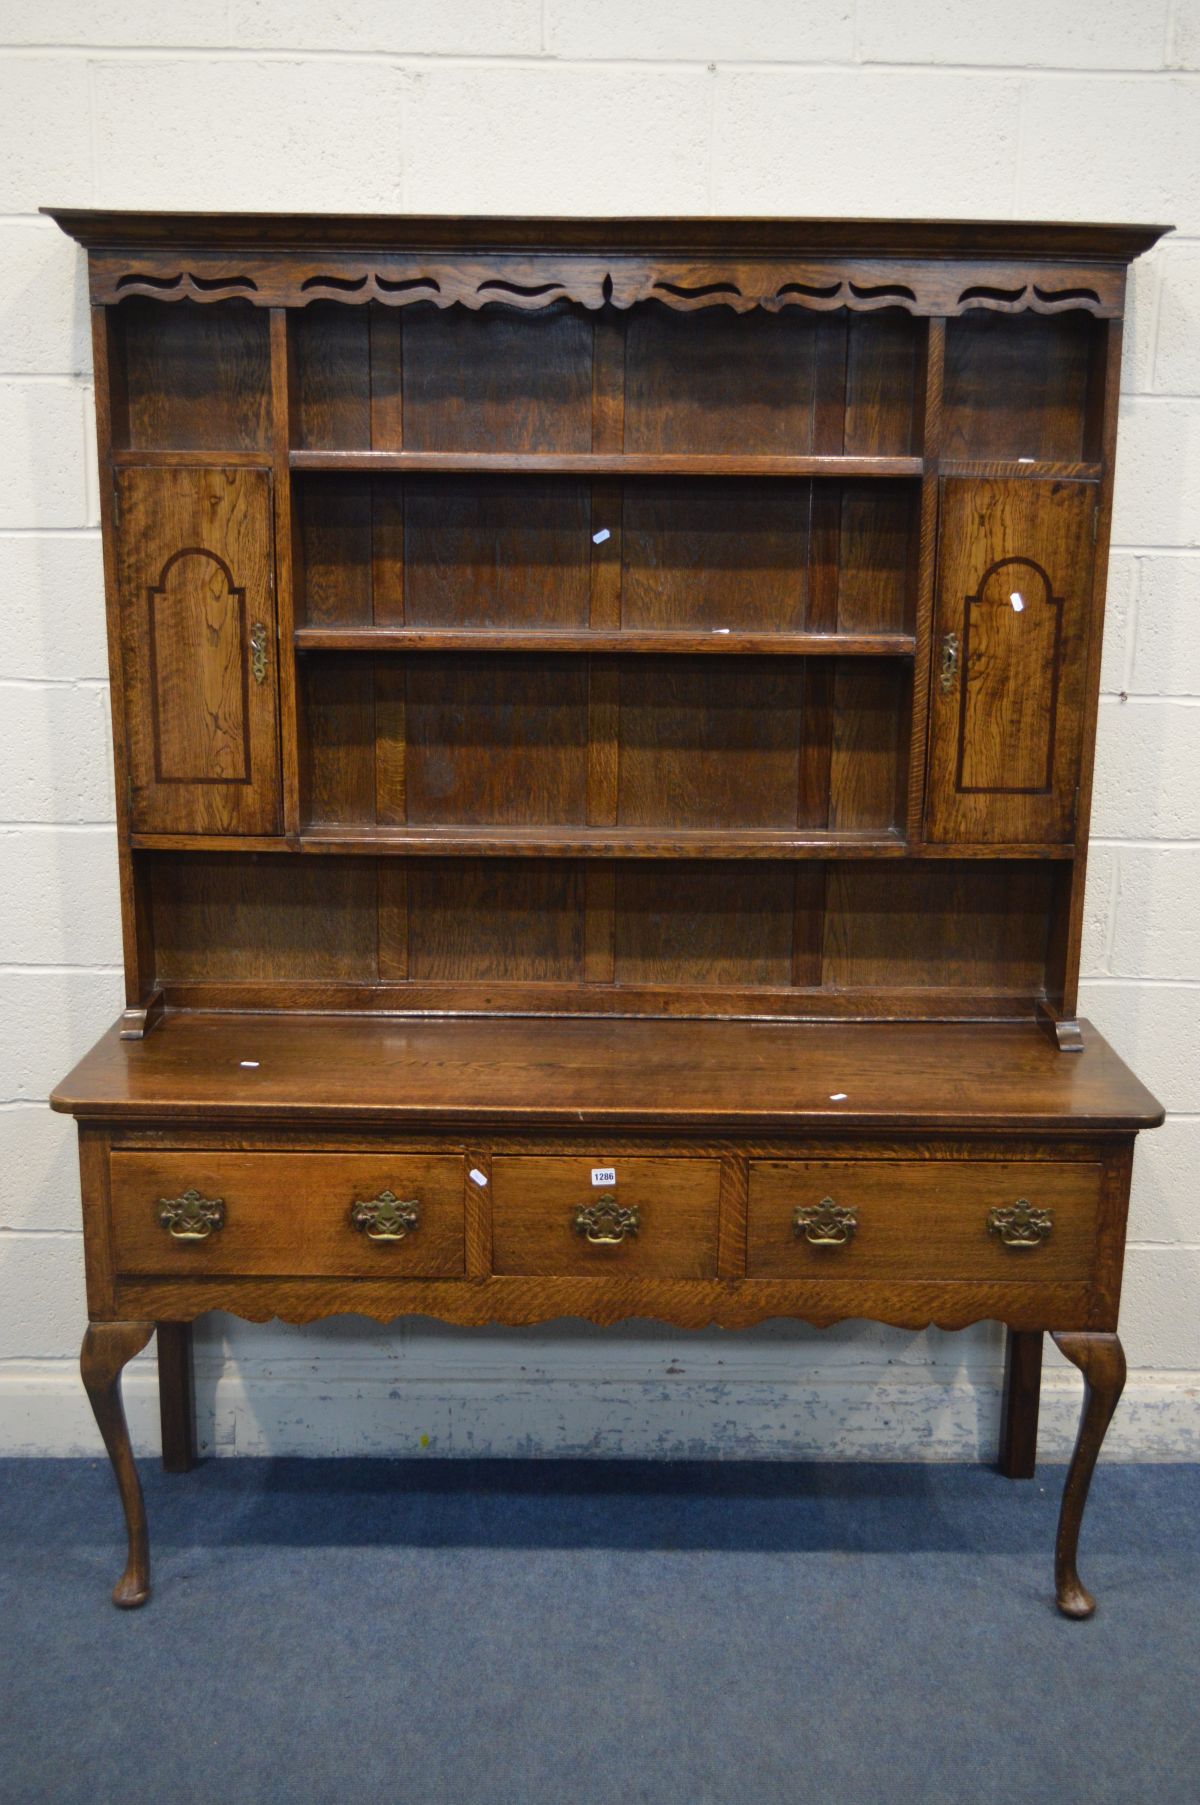 A GEORGE III STYLE OAK DRESSER, the top with a wavy apron to the top, twin single doors, over a base